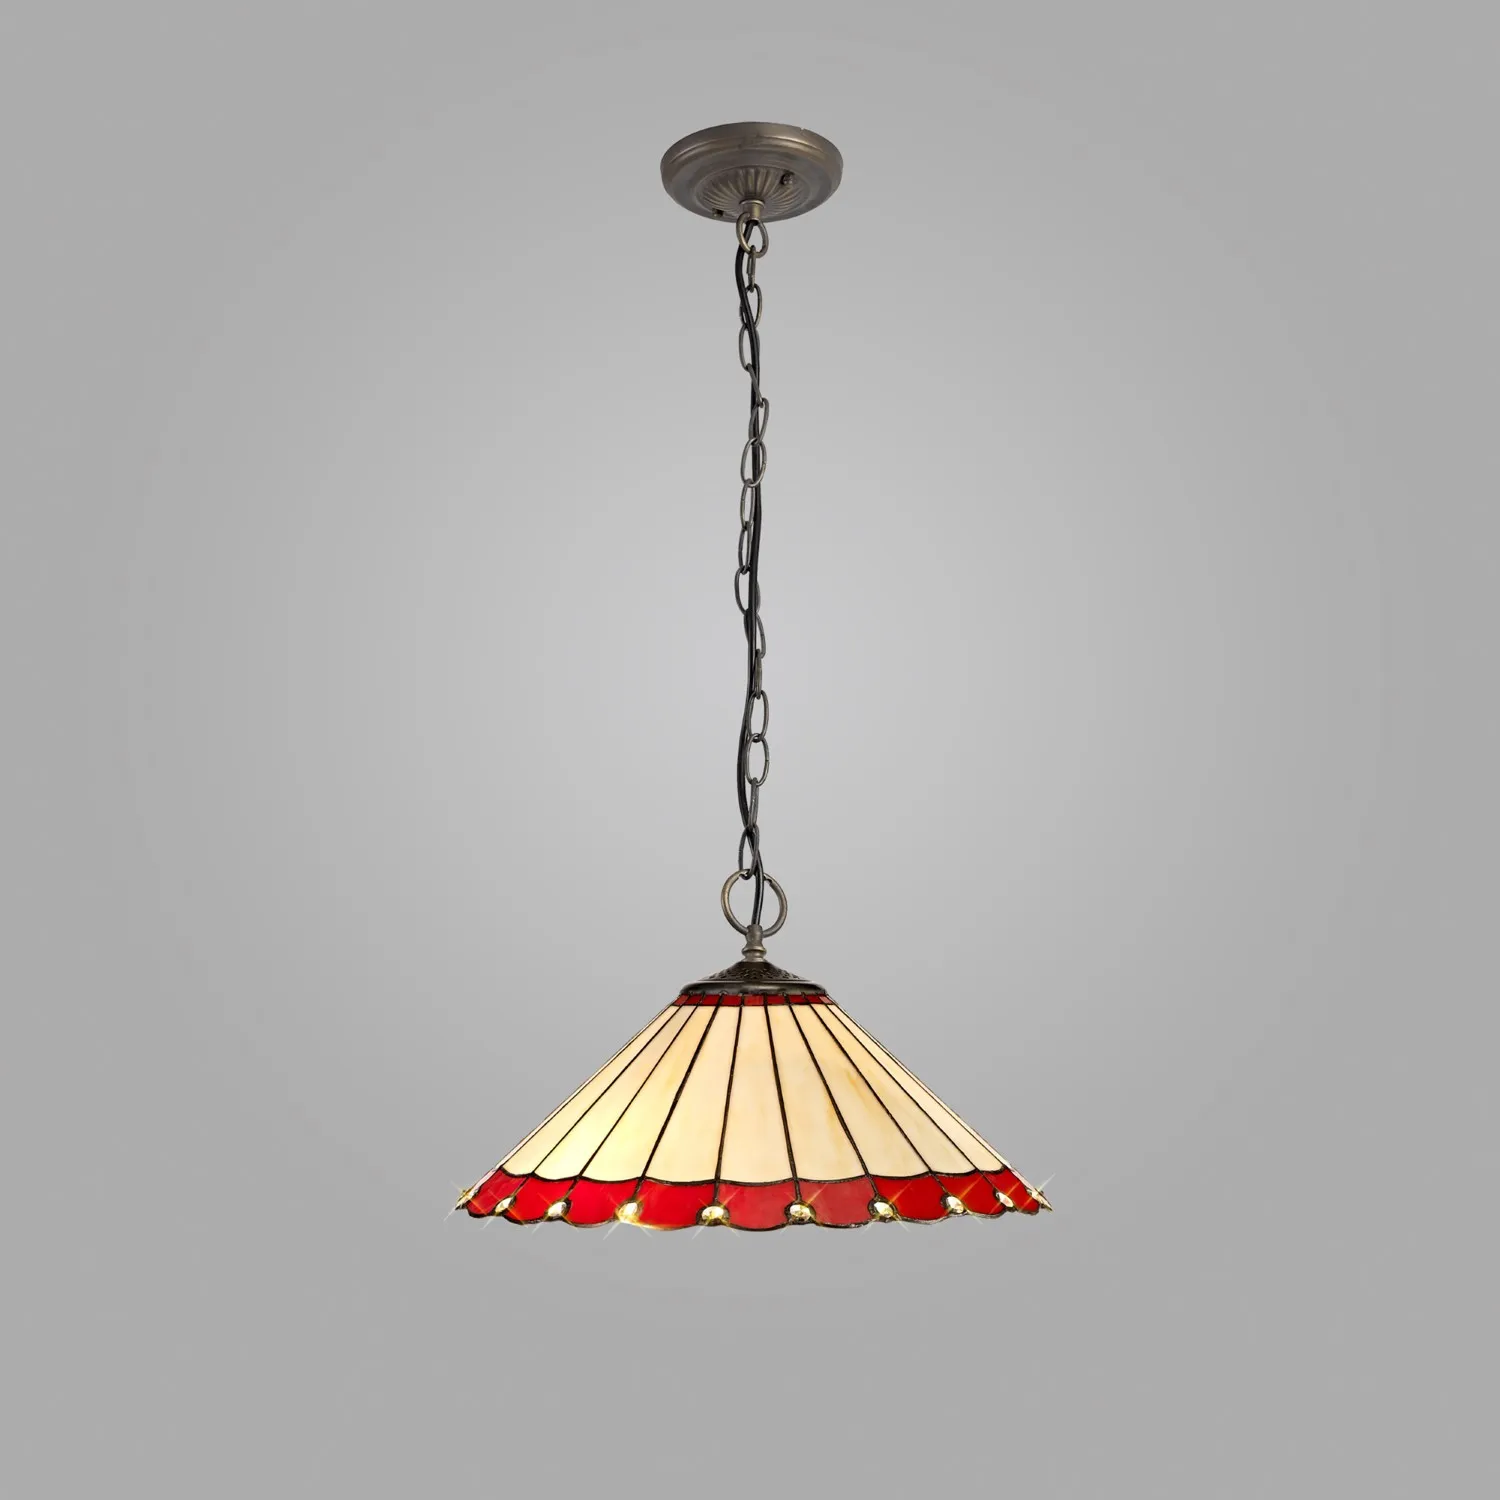 Ware 3 Light Downlighter Pendant E27 With 40cm Tiffany Shade, Red Cream Crystal Aged Antique Brass